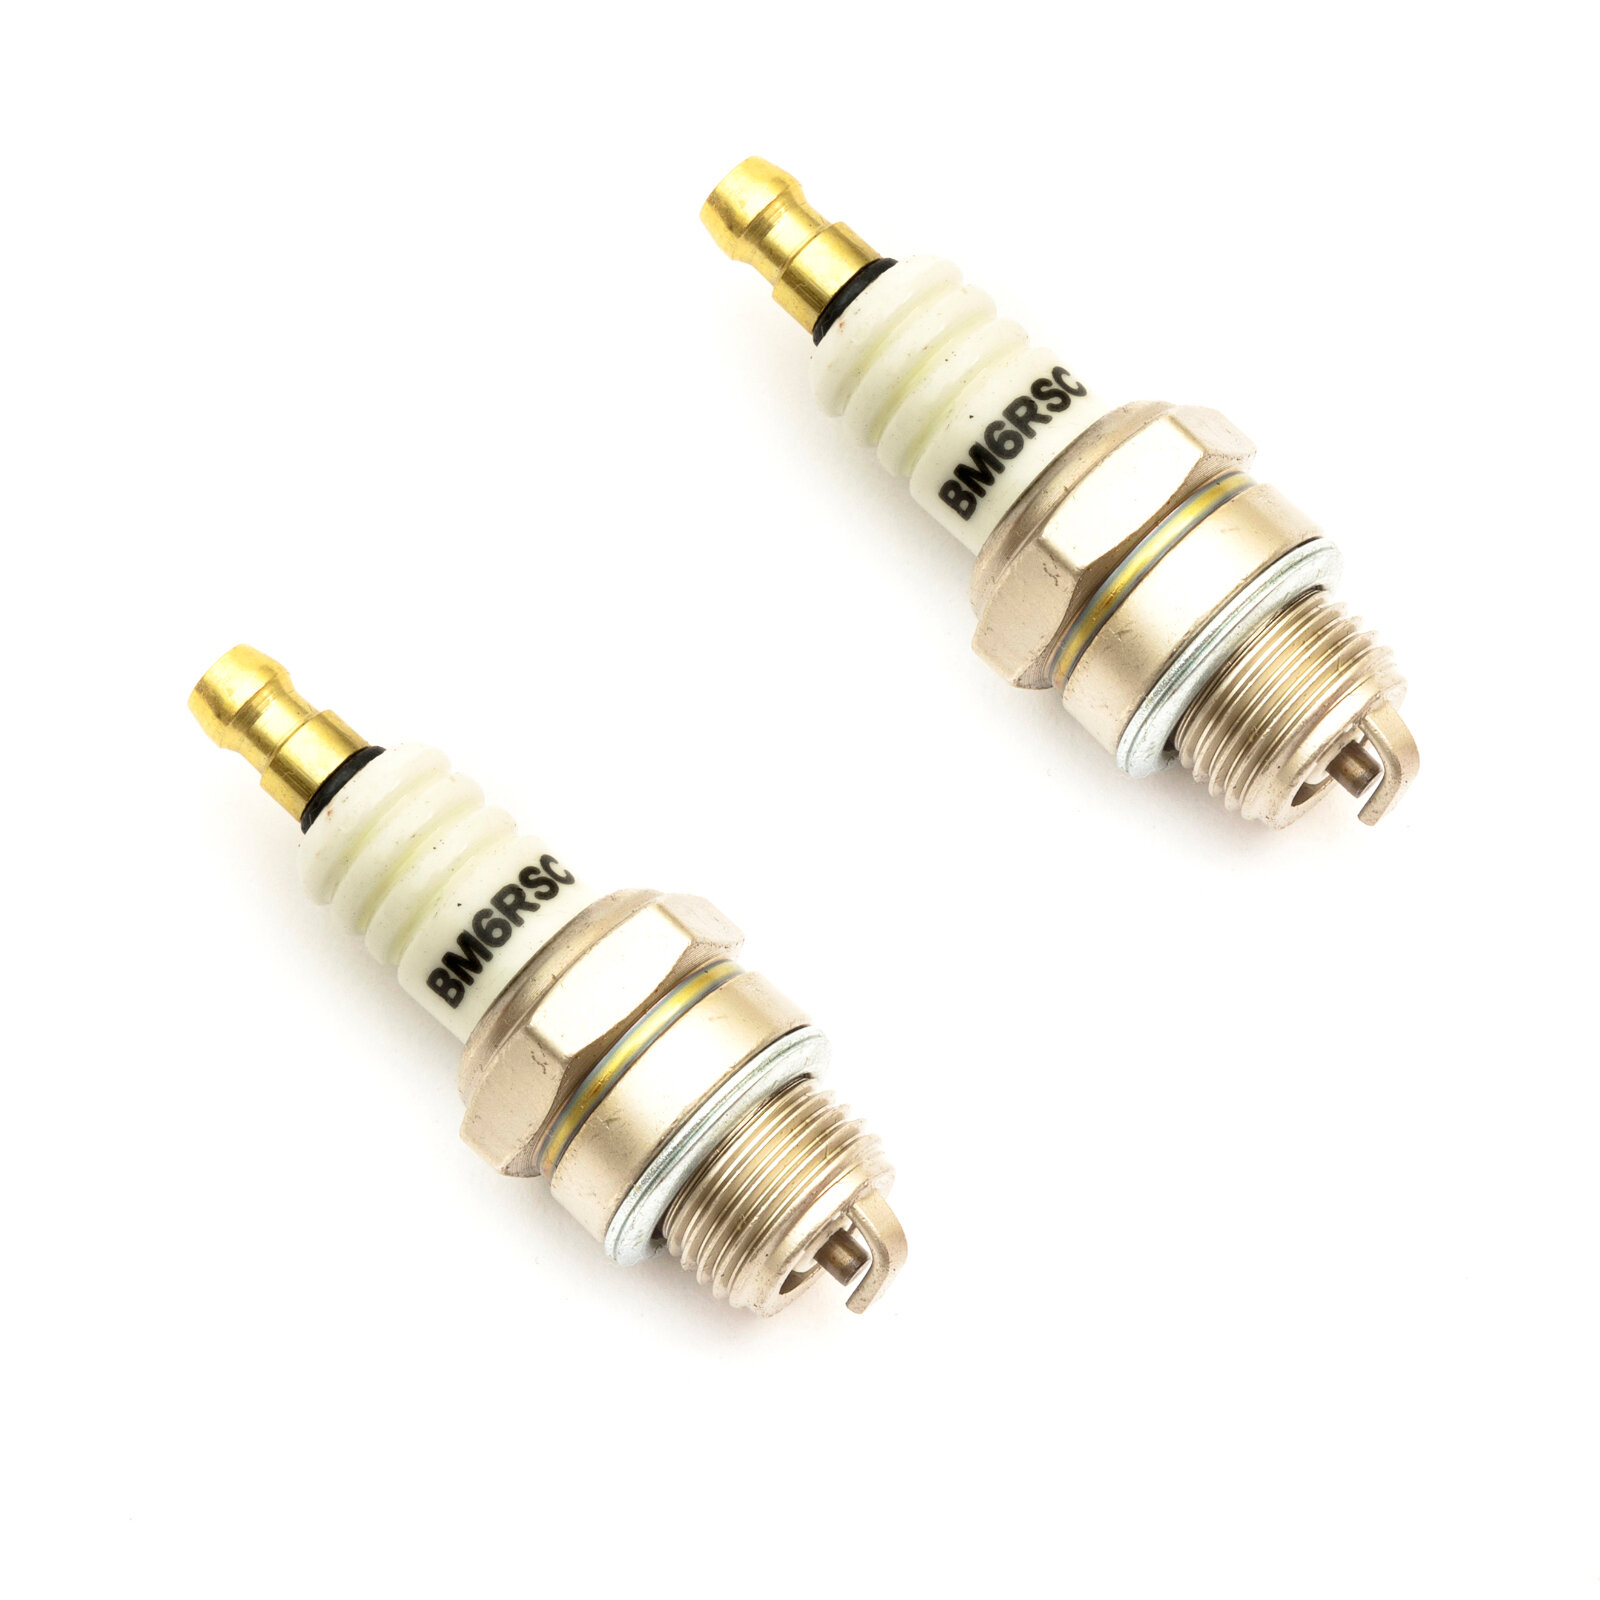 Torch Takumi Spark Plug Replaces NGK BMR6A Fits Jonsered GR44 Brushcutter X2